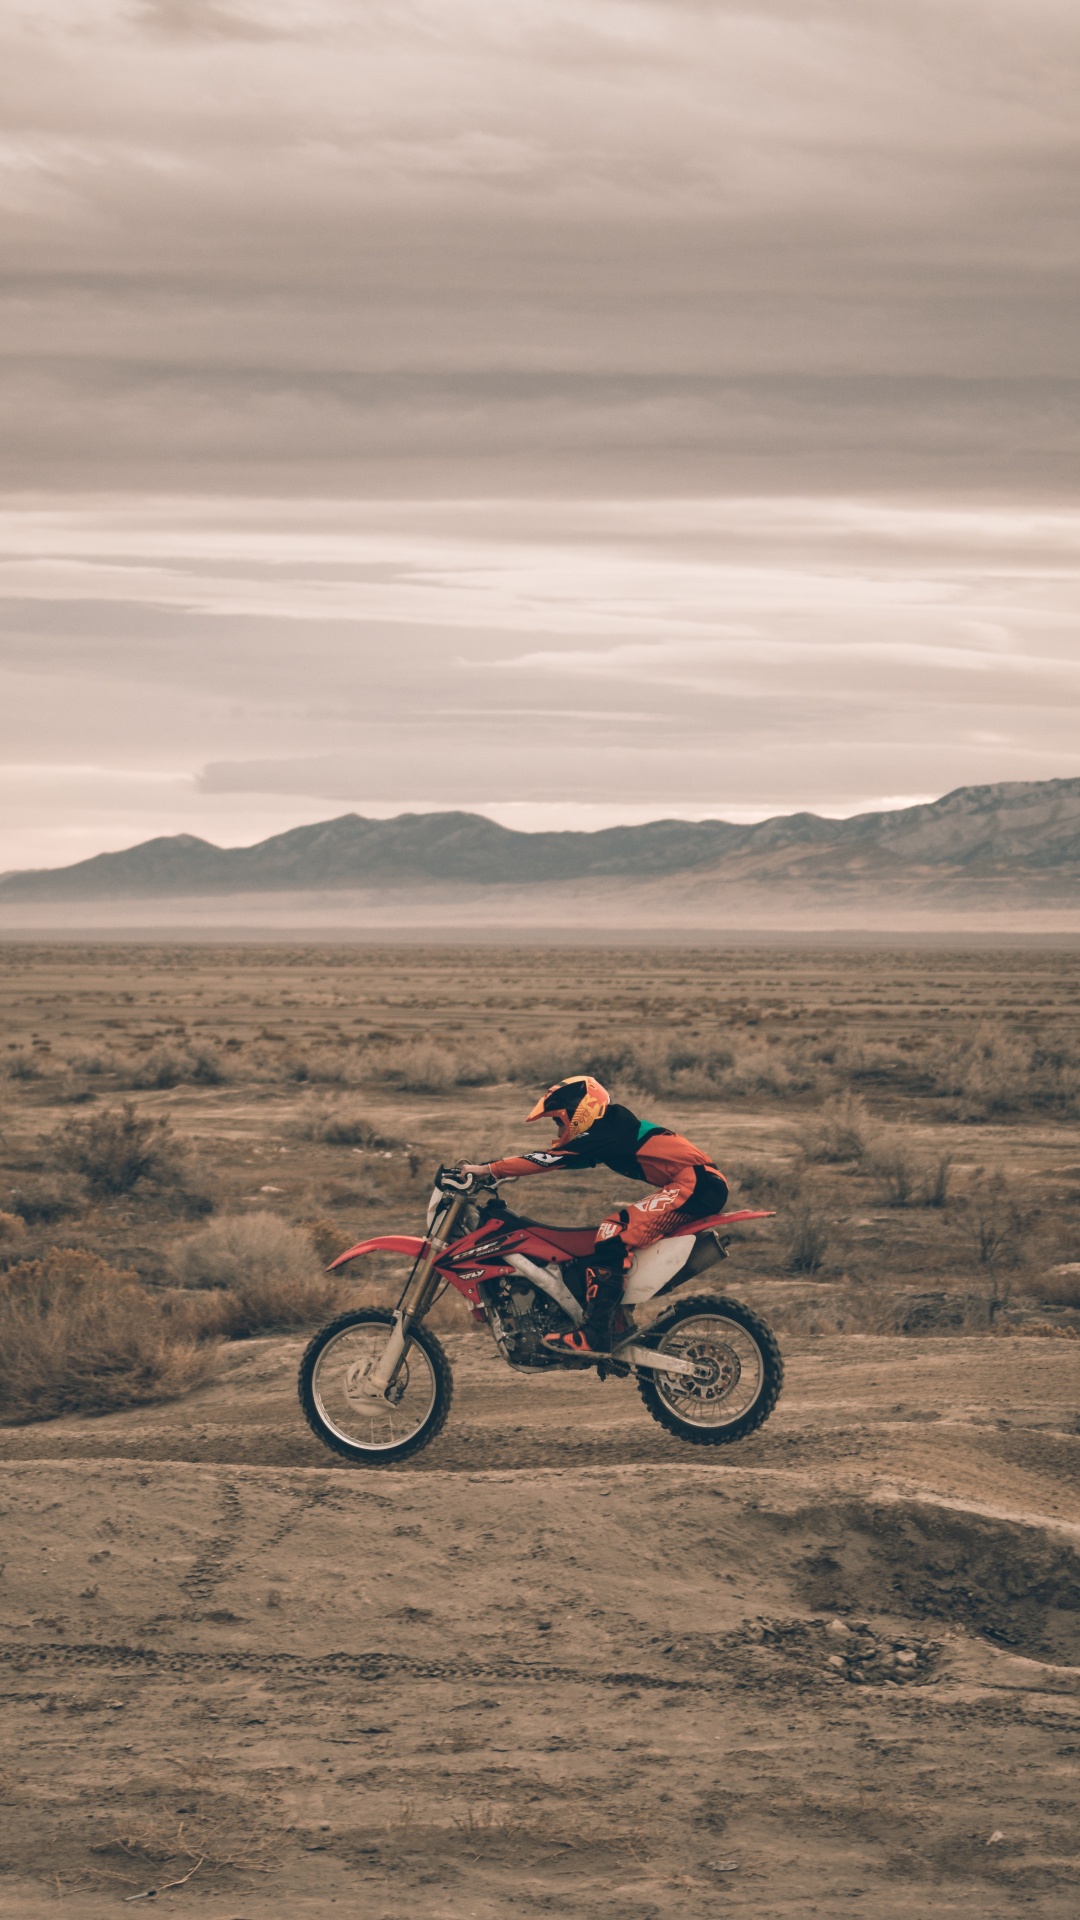 Man in Red Jacket Riding on Red Motorcycle on Brown Field During Daytime. Wallpaper in 1080x1920 Resolution